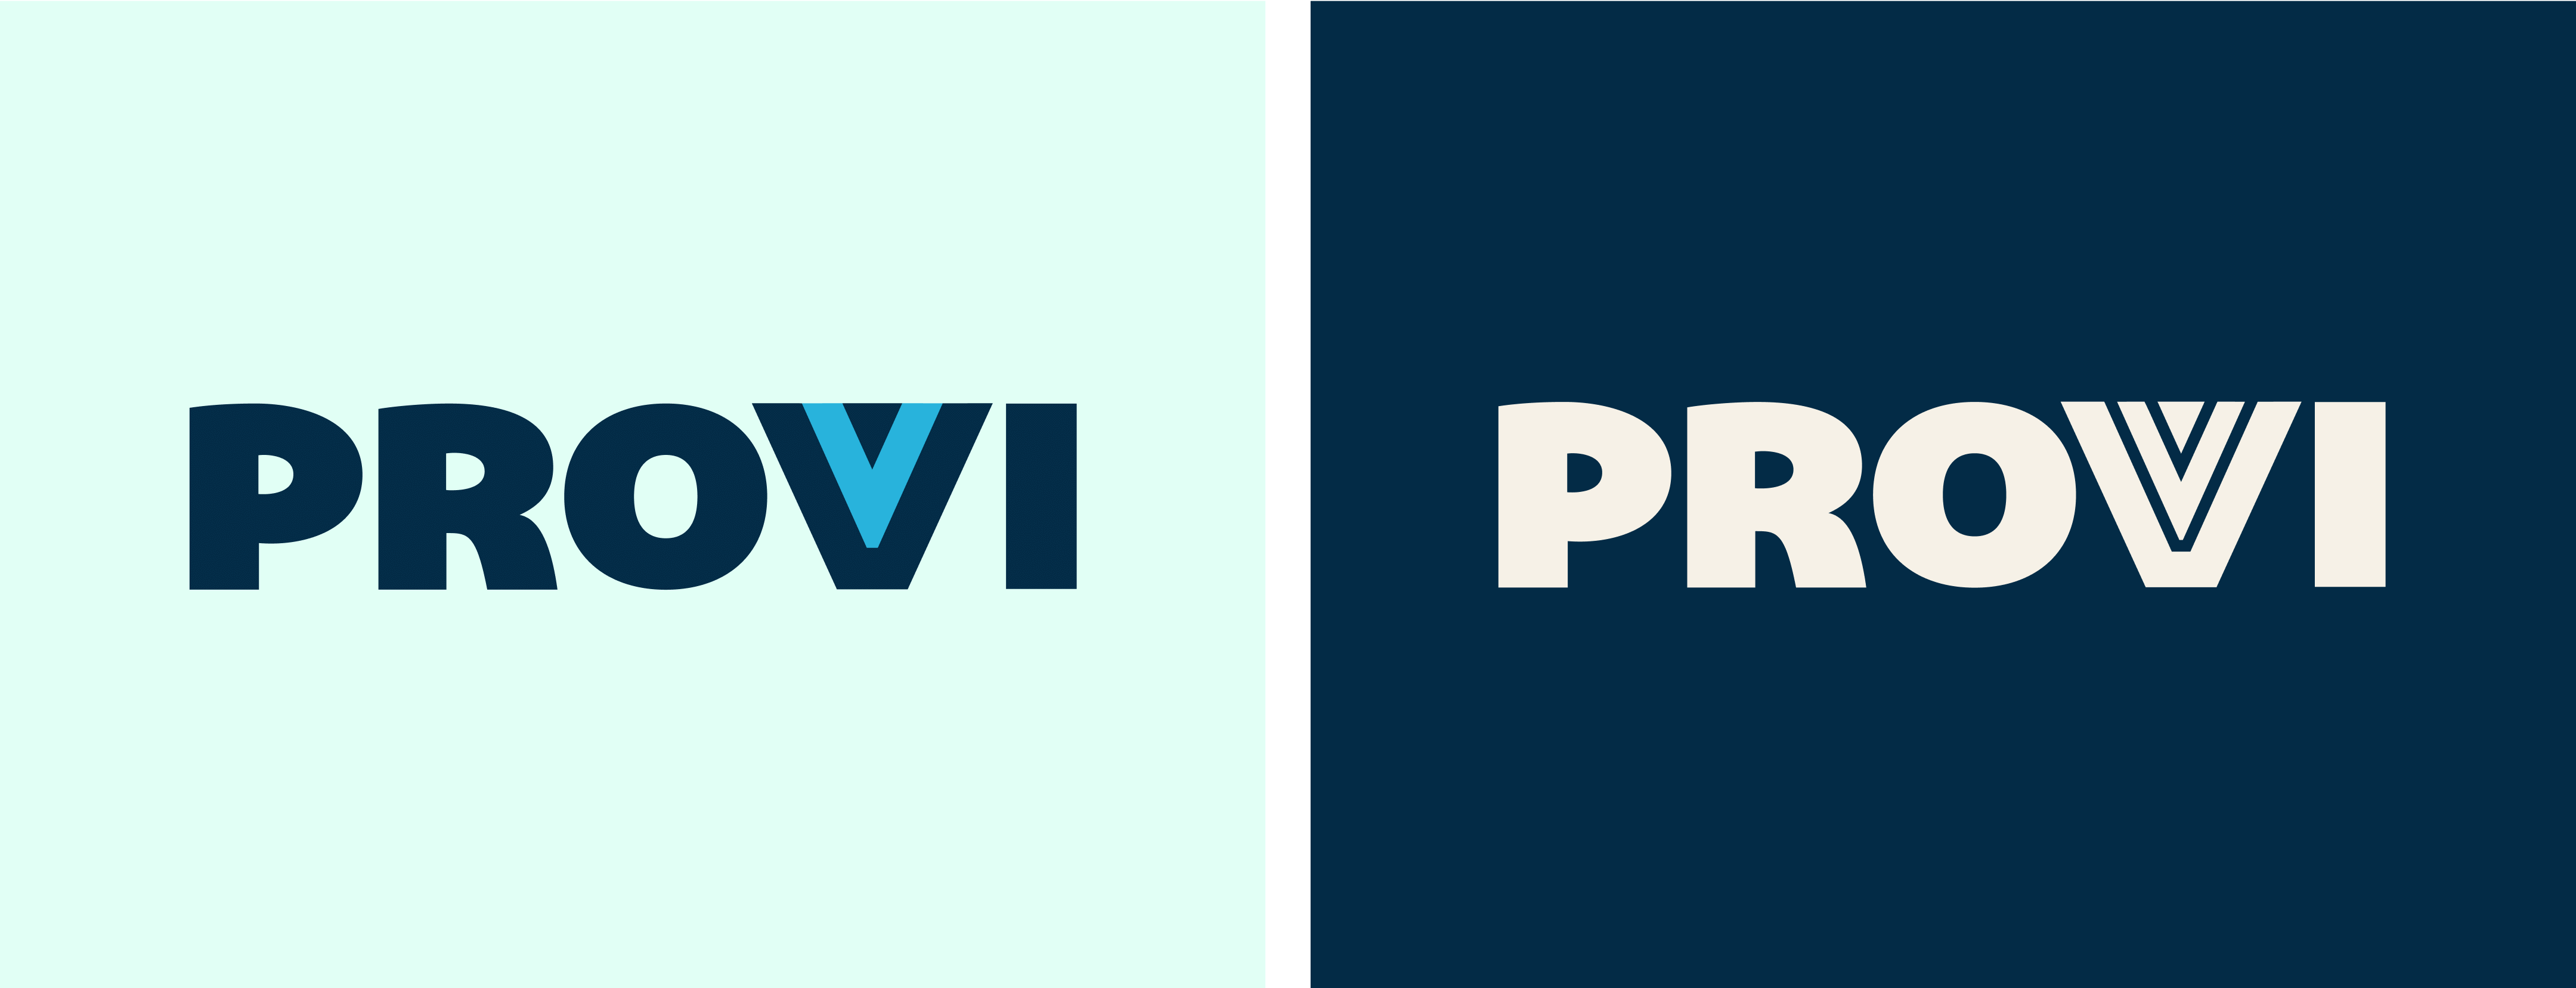 Two variations of the new Provi logo